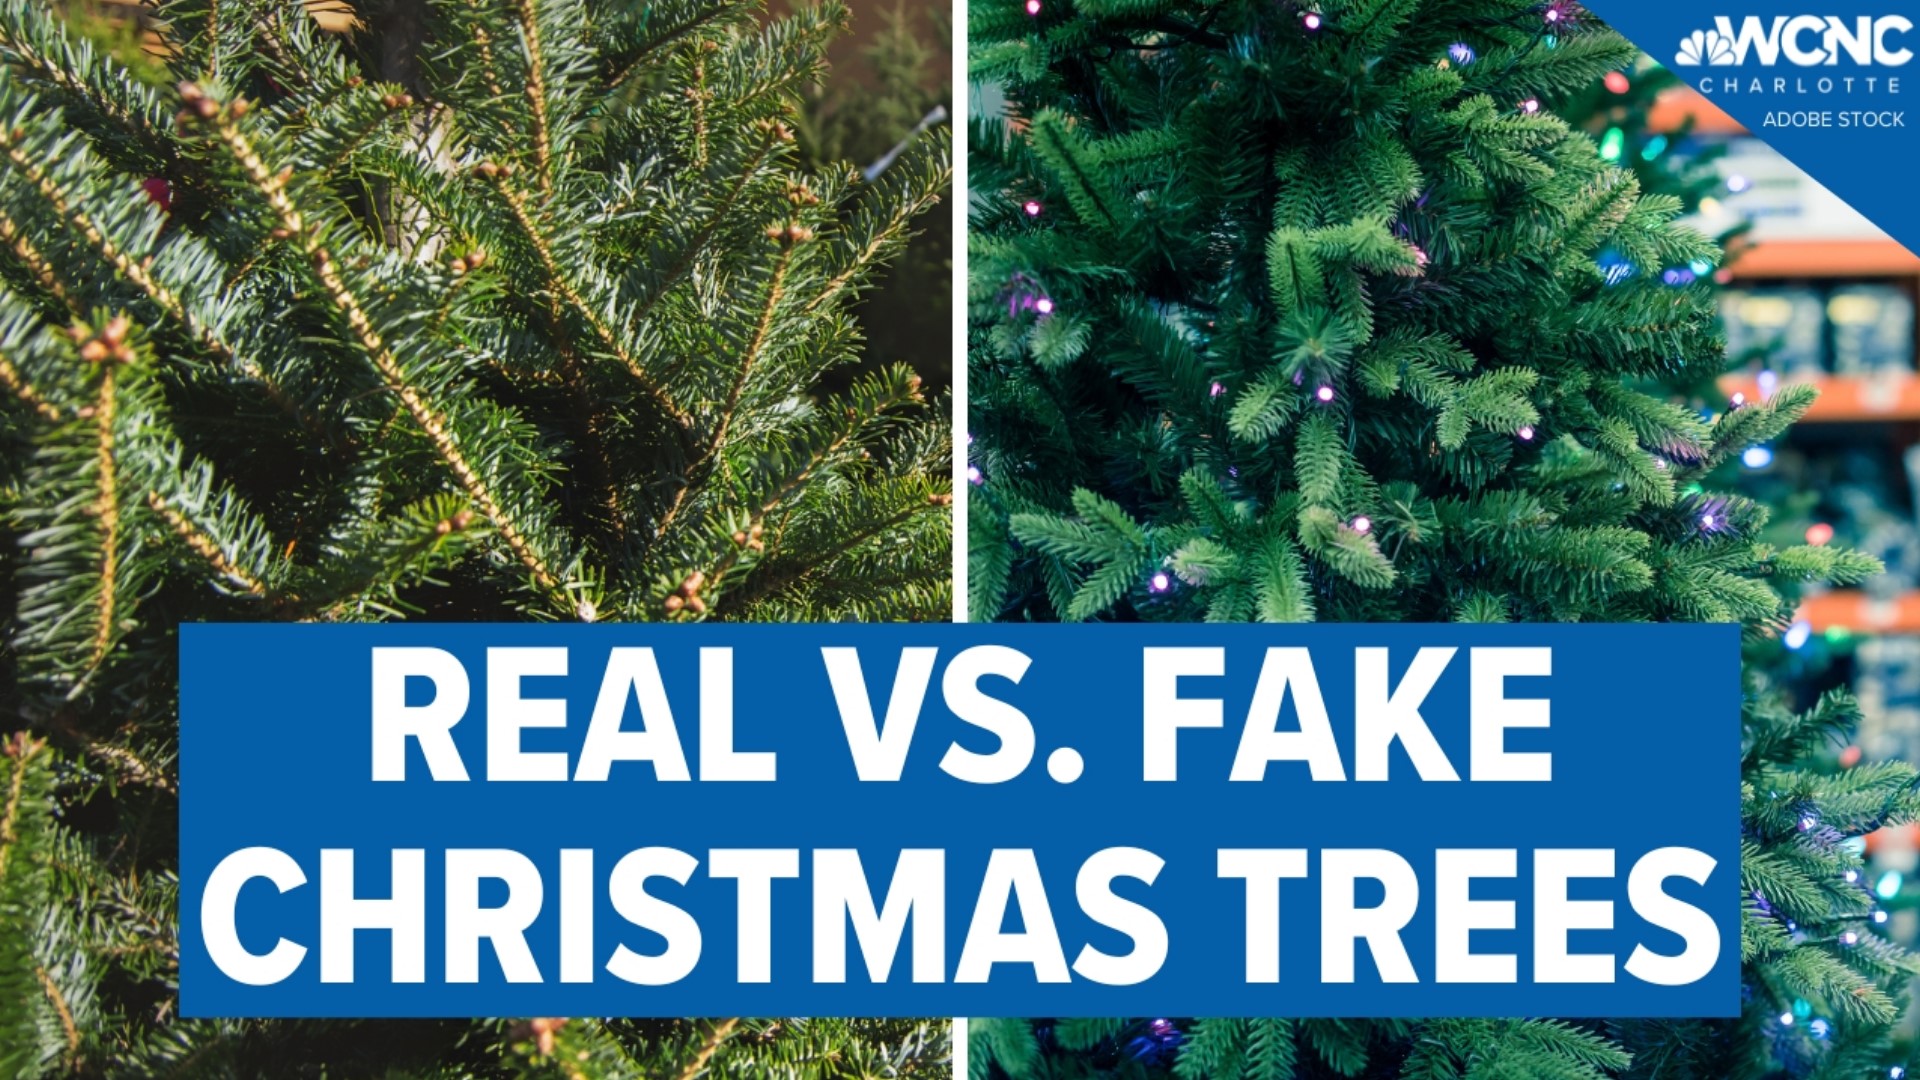 Most people have a preference based on how the tree looks but experts say if saving money is your main focus, the choice is clear.